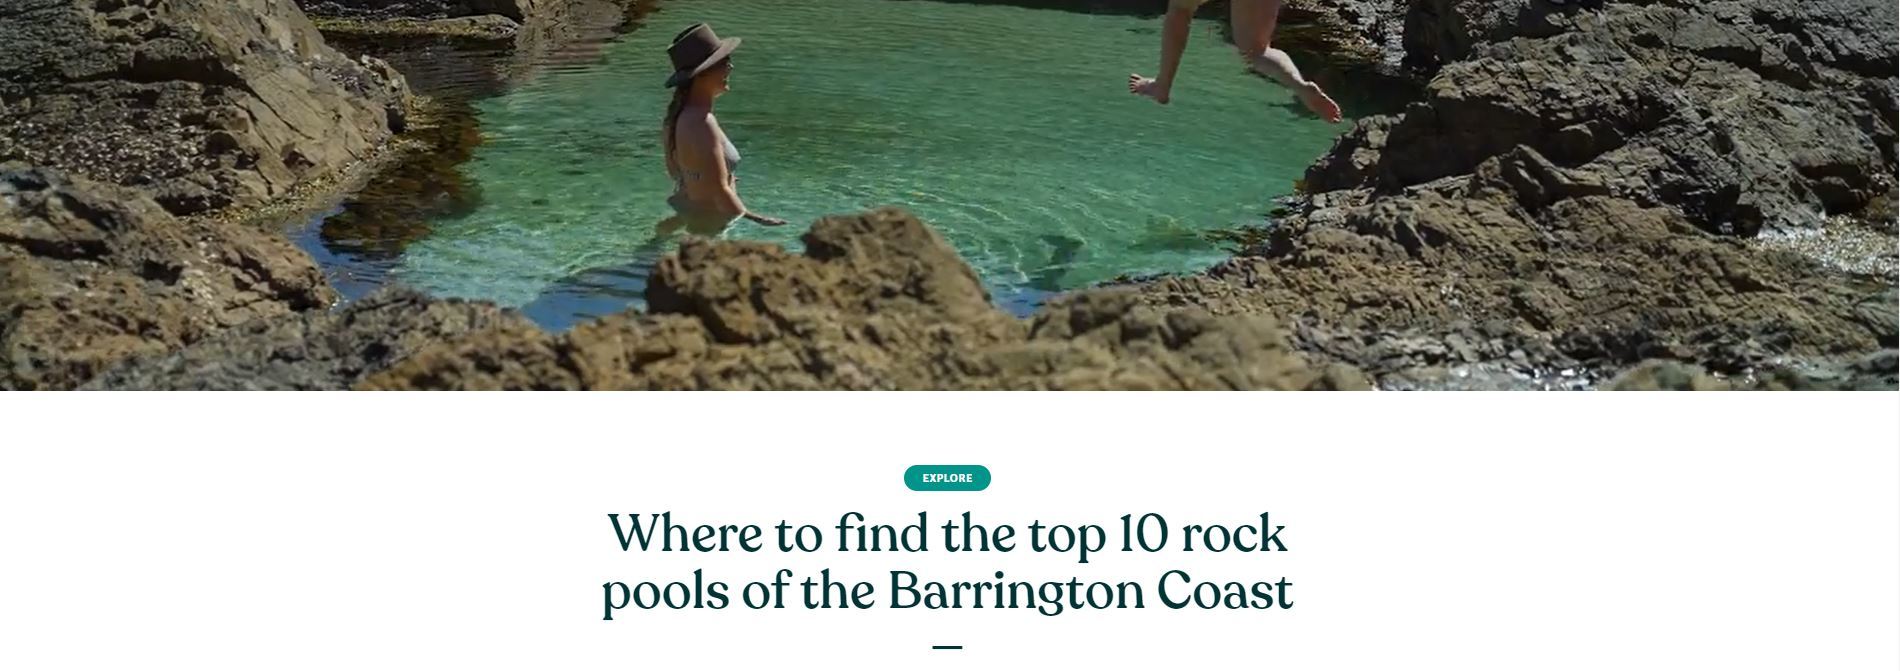 Where to find the top 10 rock pools of the Barrington Coast